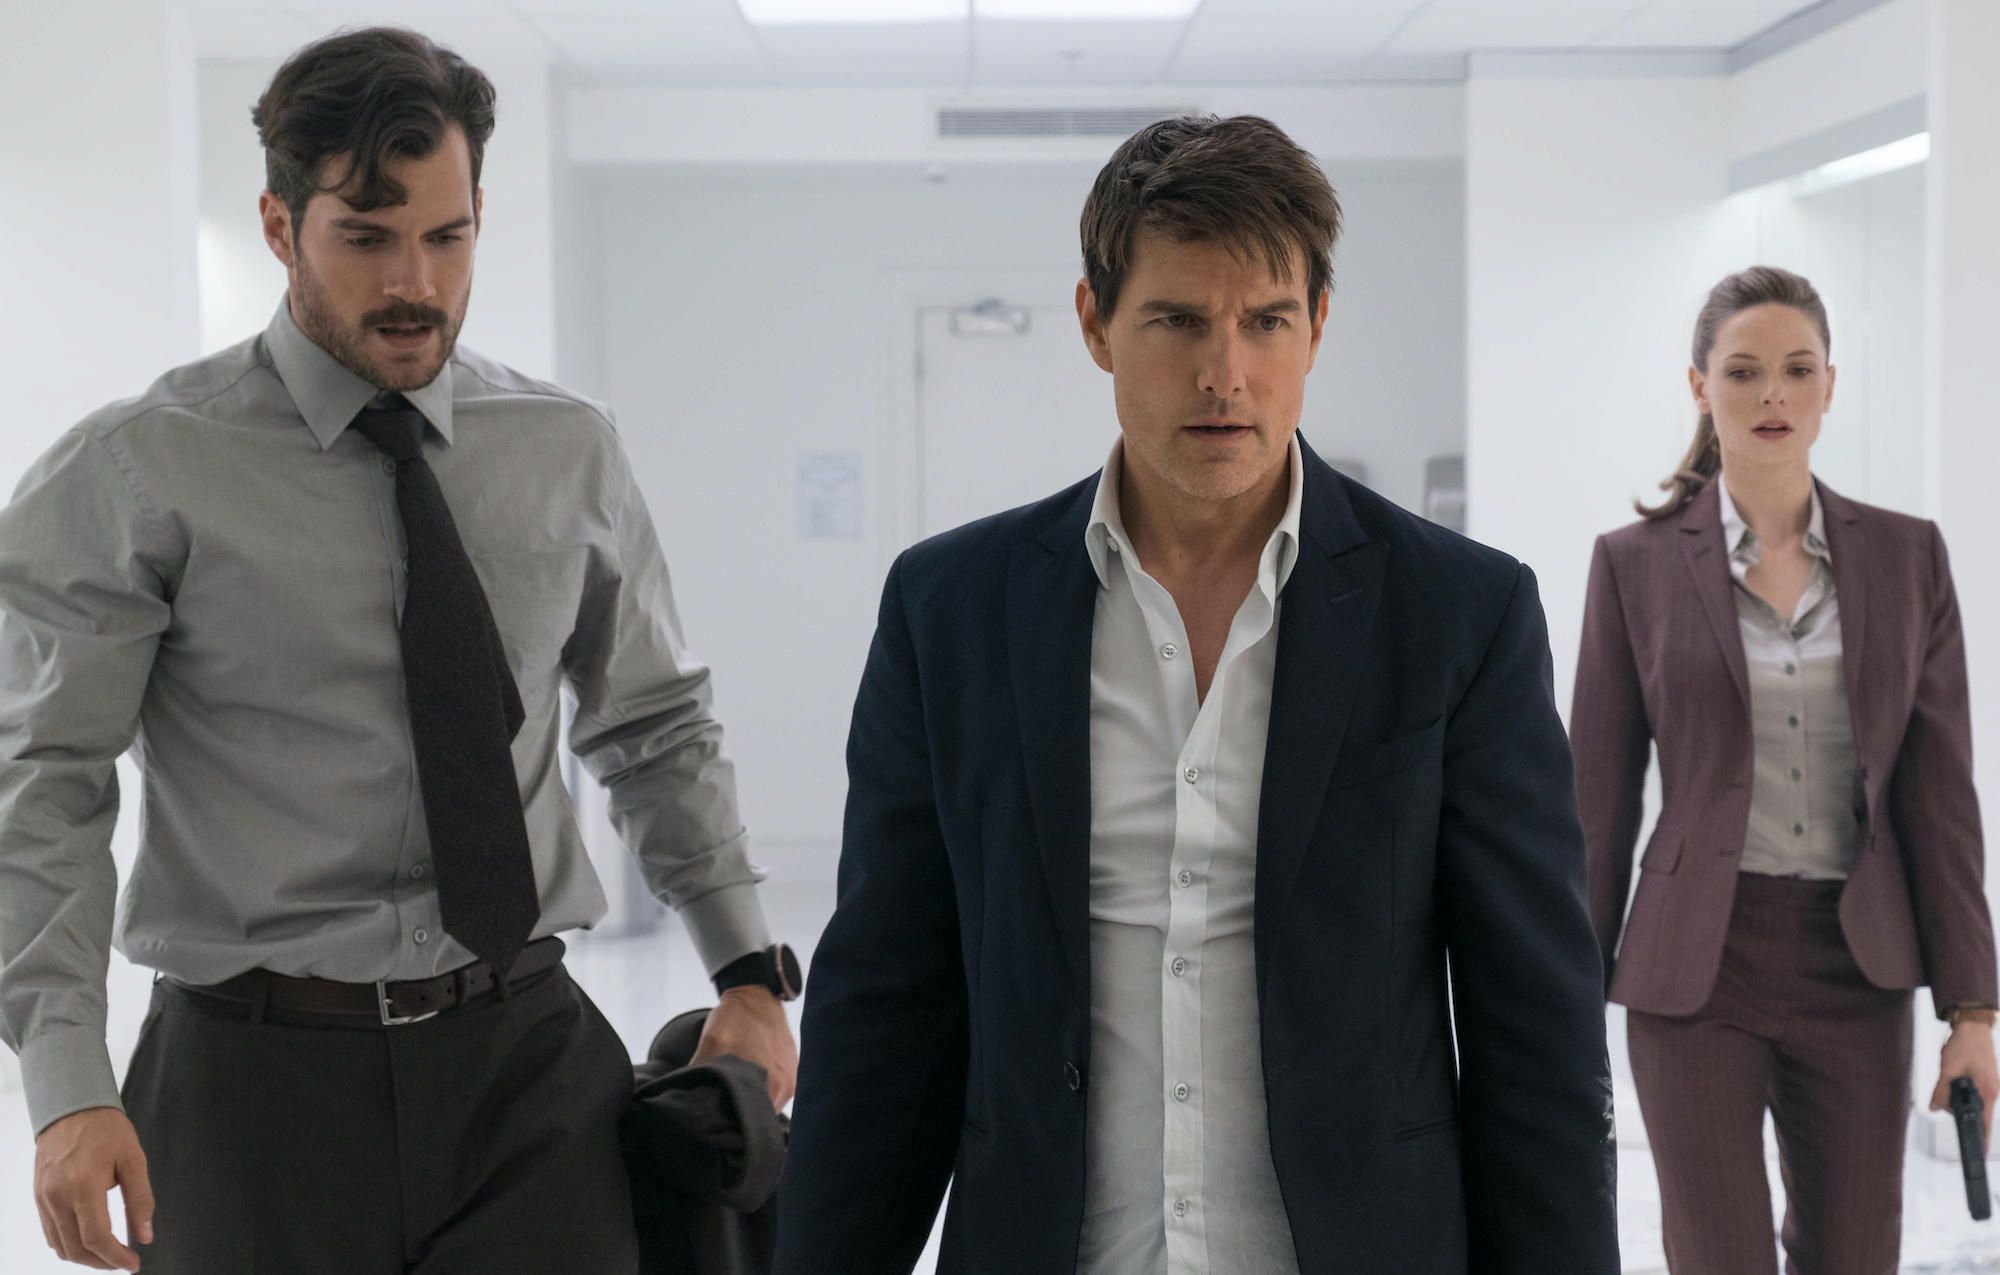 A COVID 19 Outbreak Has Reportedly Hit The Set Of 'Mission: Impossible 7'